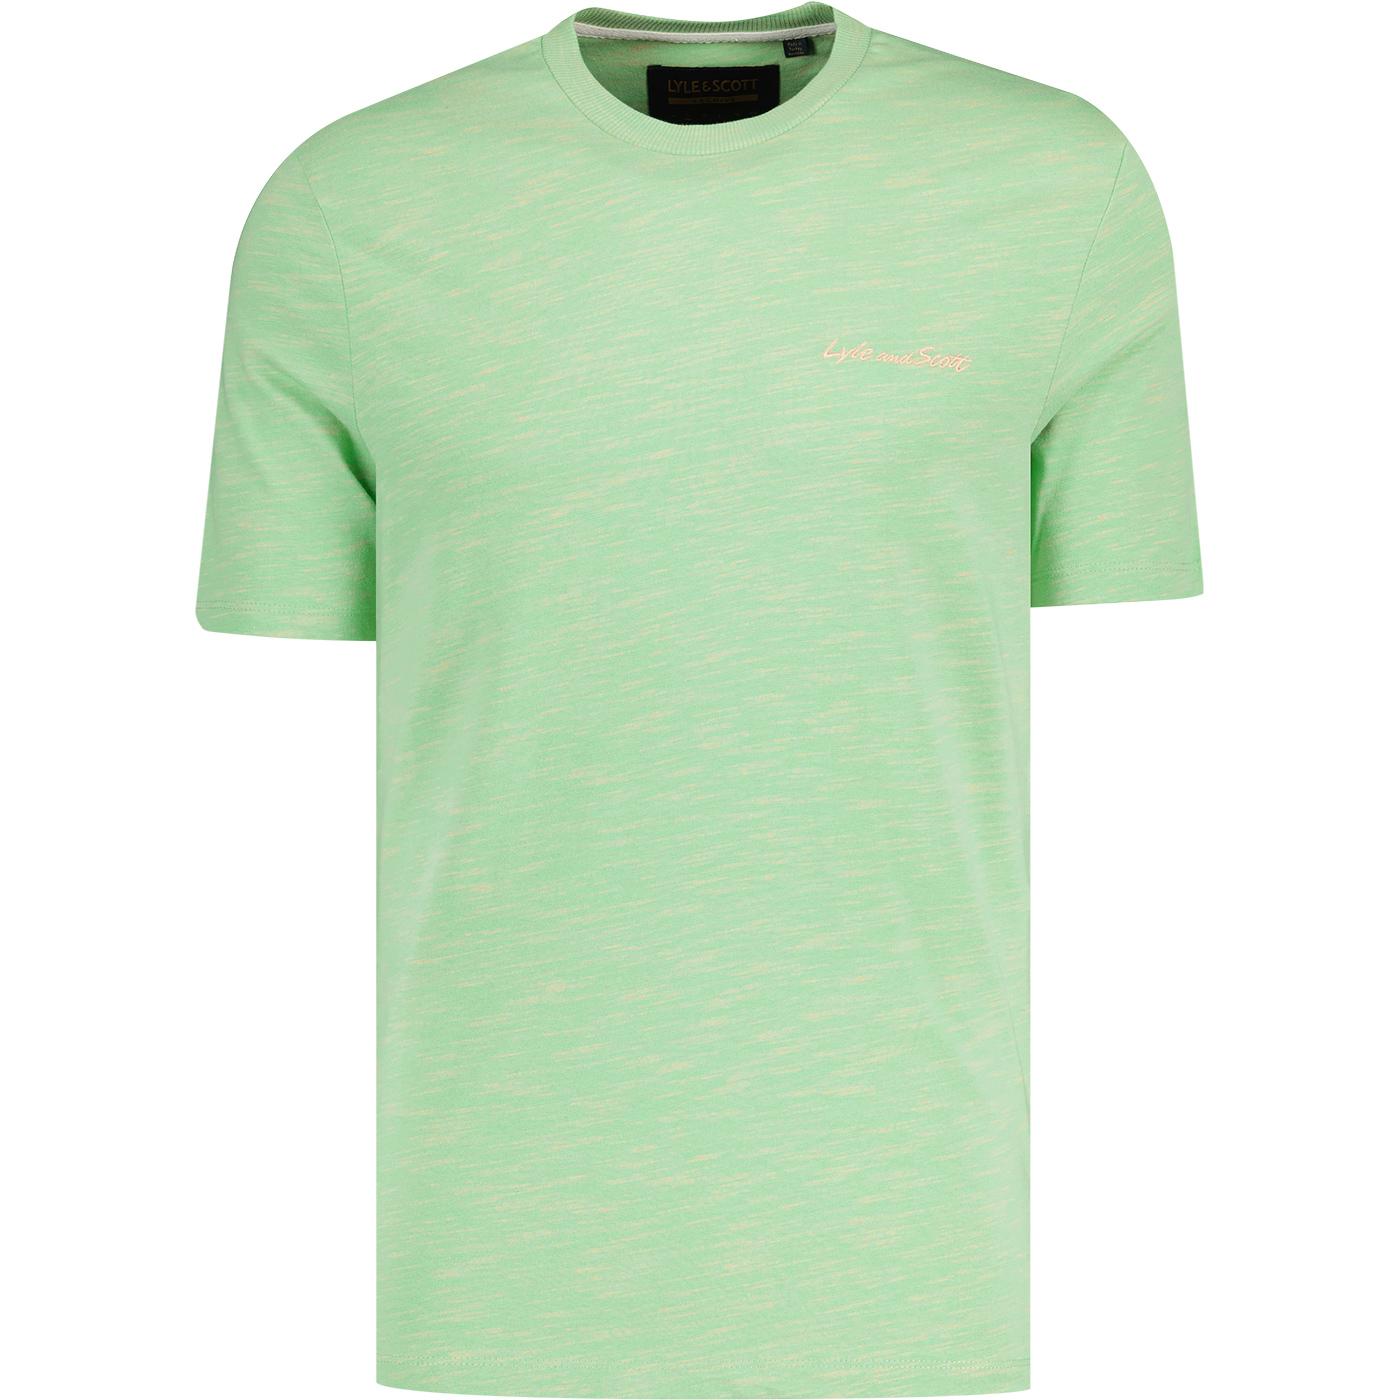 Lyle & Scott Retro Space Dyed Tee Molly's Green